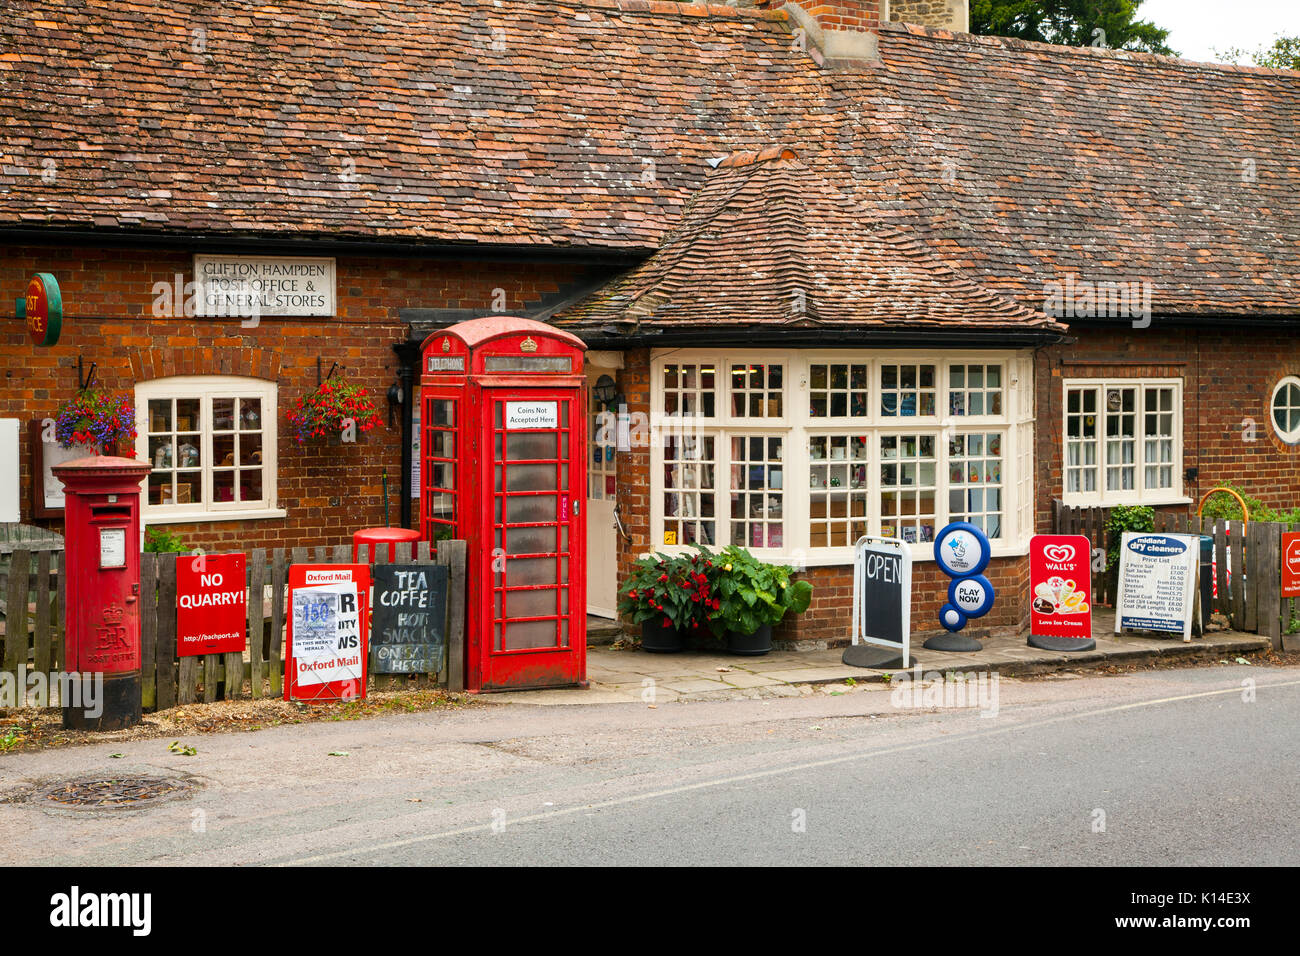 Clifton Hampden village post office and general stores in Oxfordshire with red phone box and red round post box outside now serving tea and coffee Stock Photo